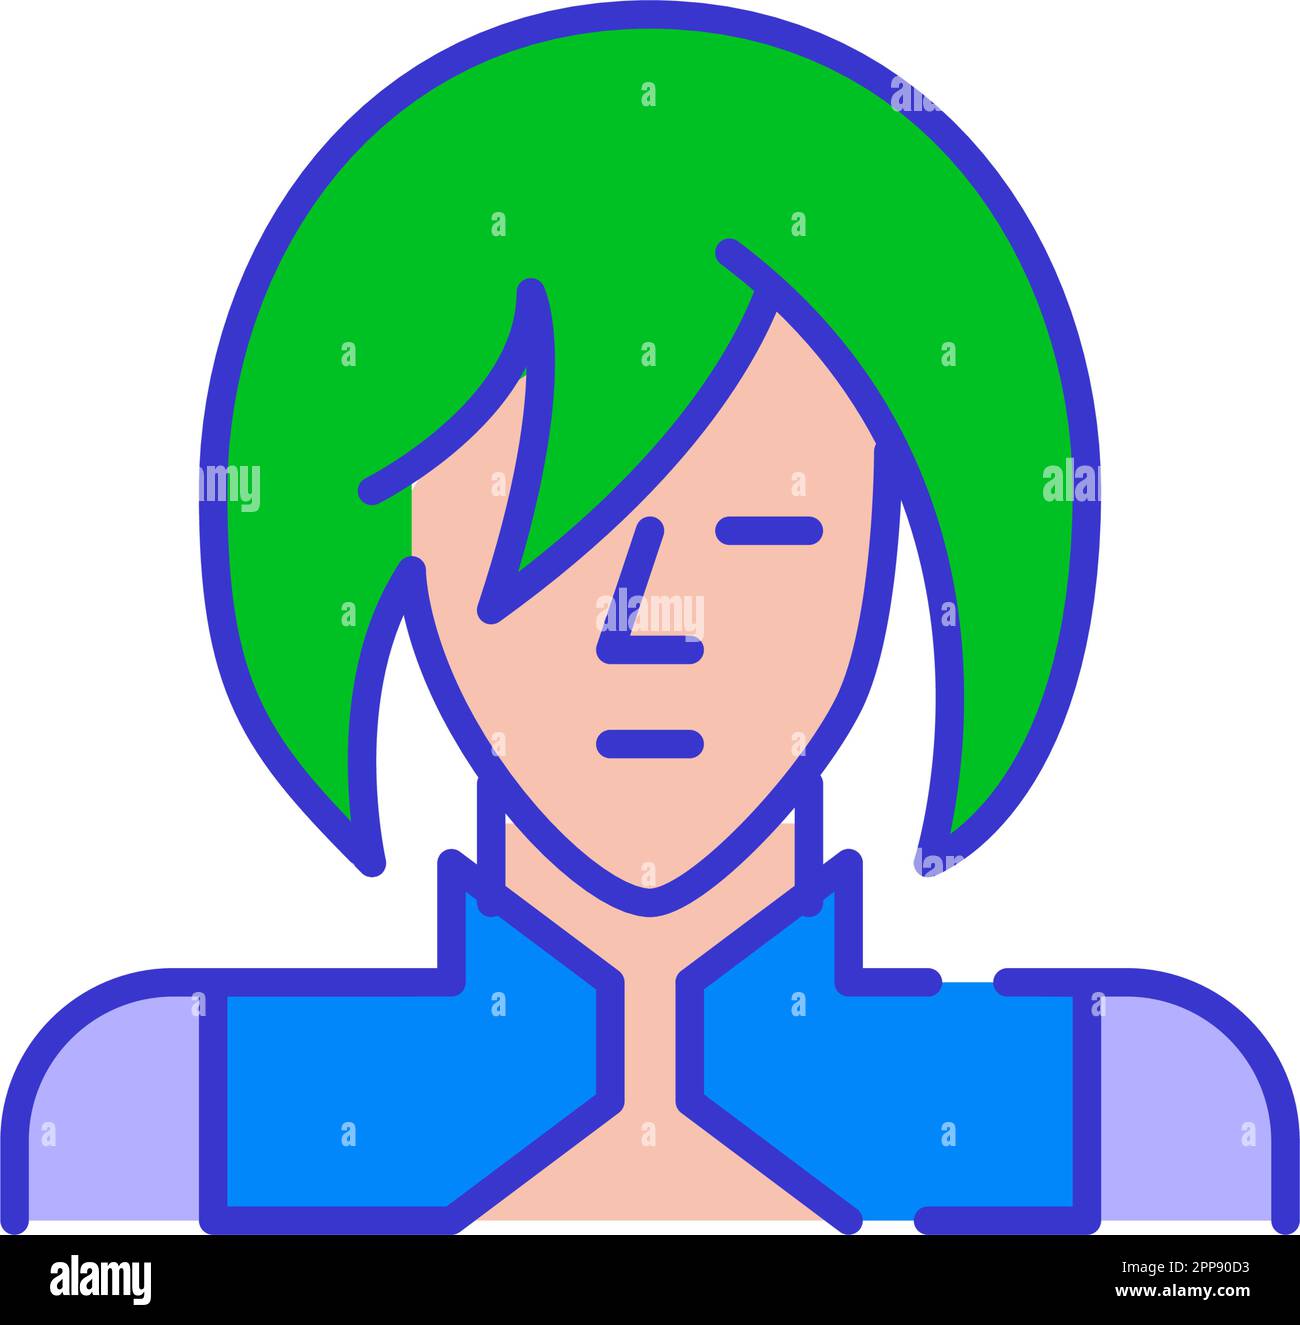 Anime Guy Is a Mage with Green Hair - Super Rare 3D Art | OpenSea